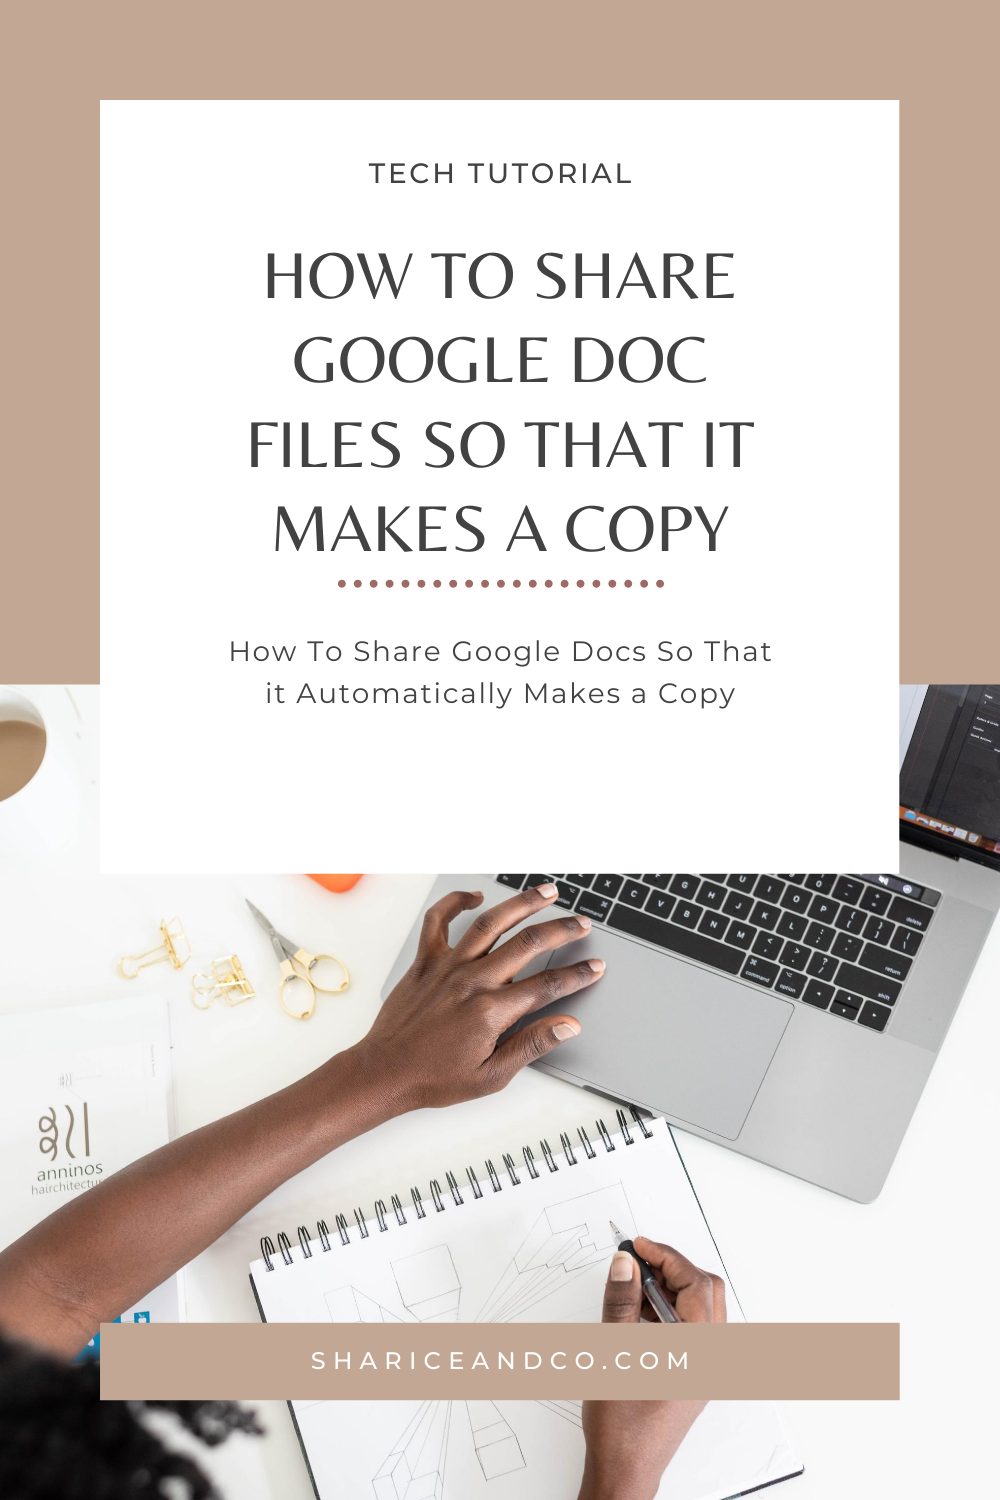 How To Share Google Docs So That it Automatically Makes a Copy